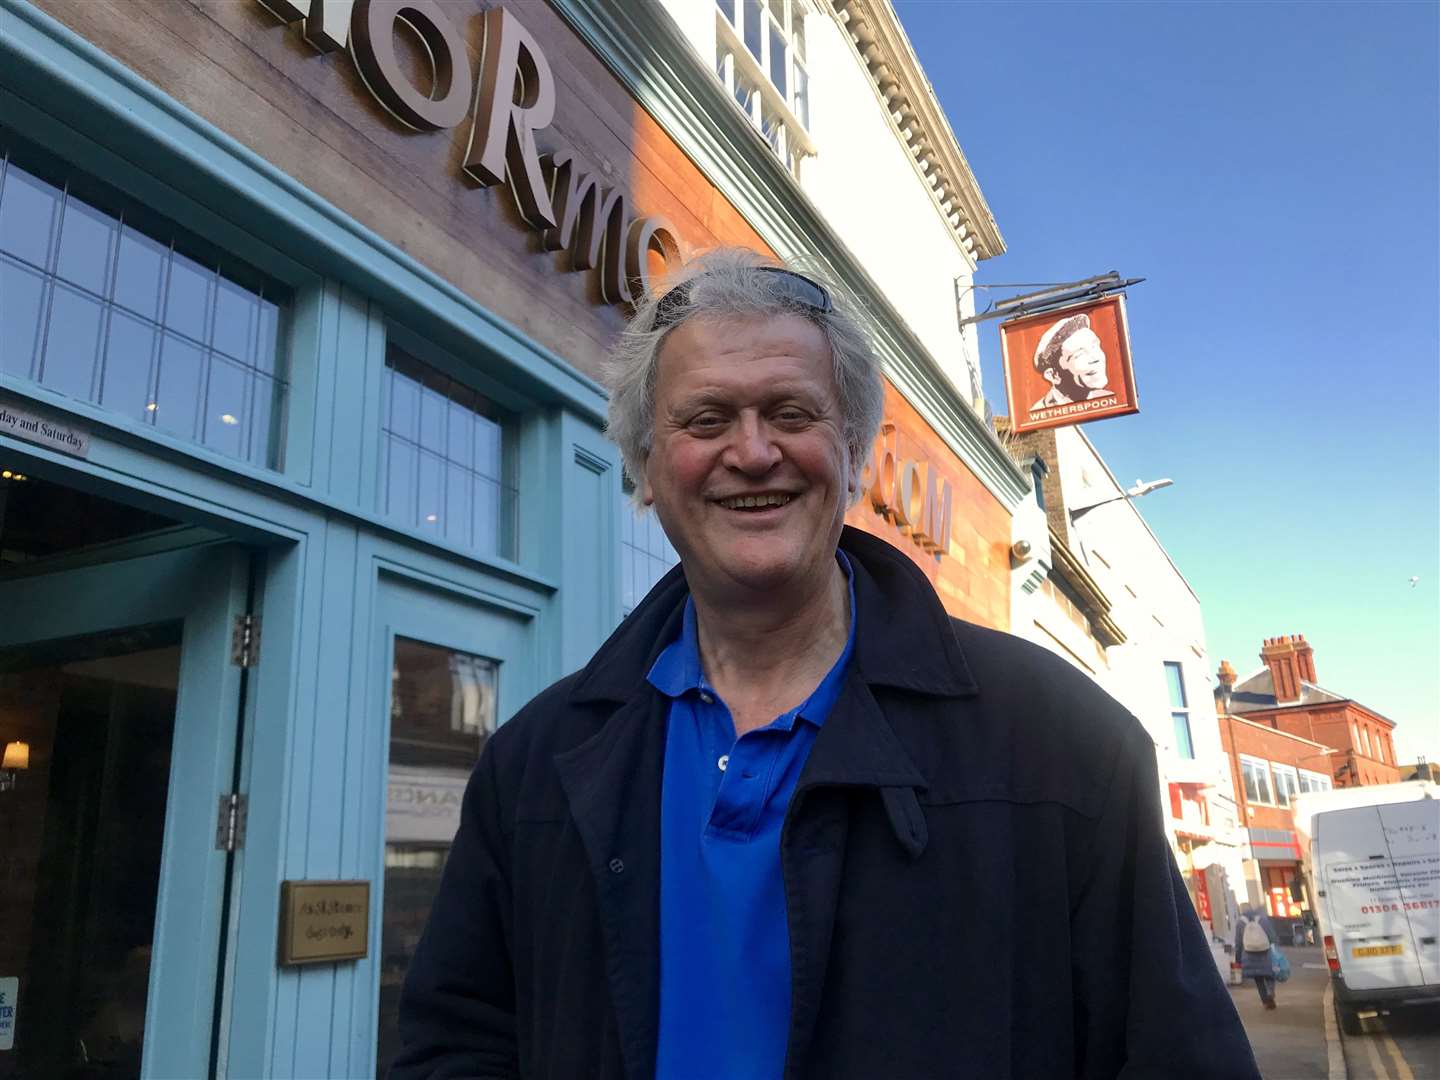 Tim Martin's pub chain Whetherspoon has left 40,000 people without a job and no means to pay their bills